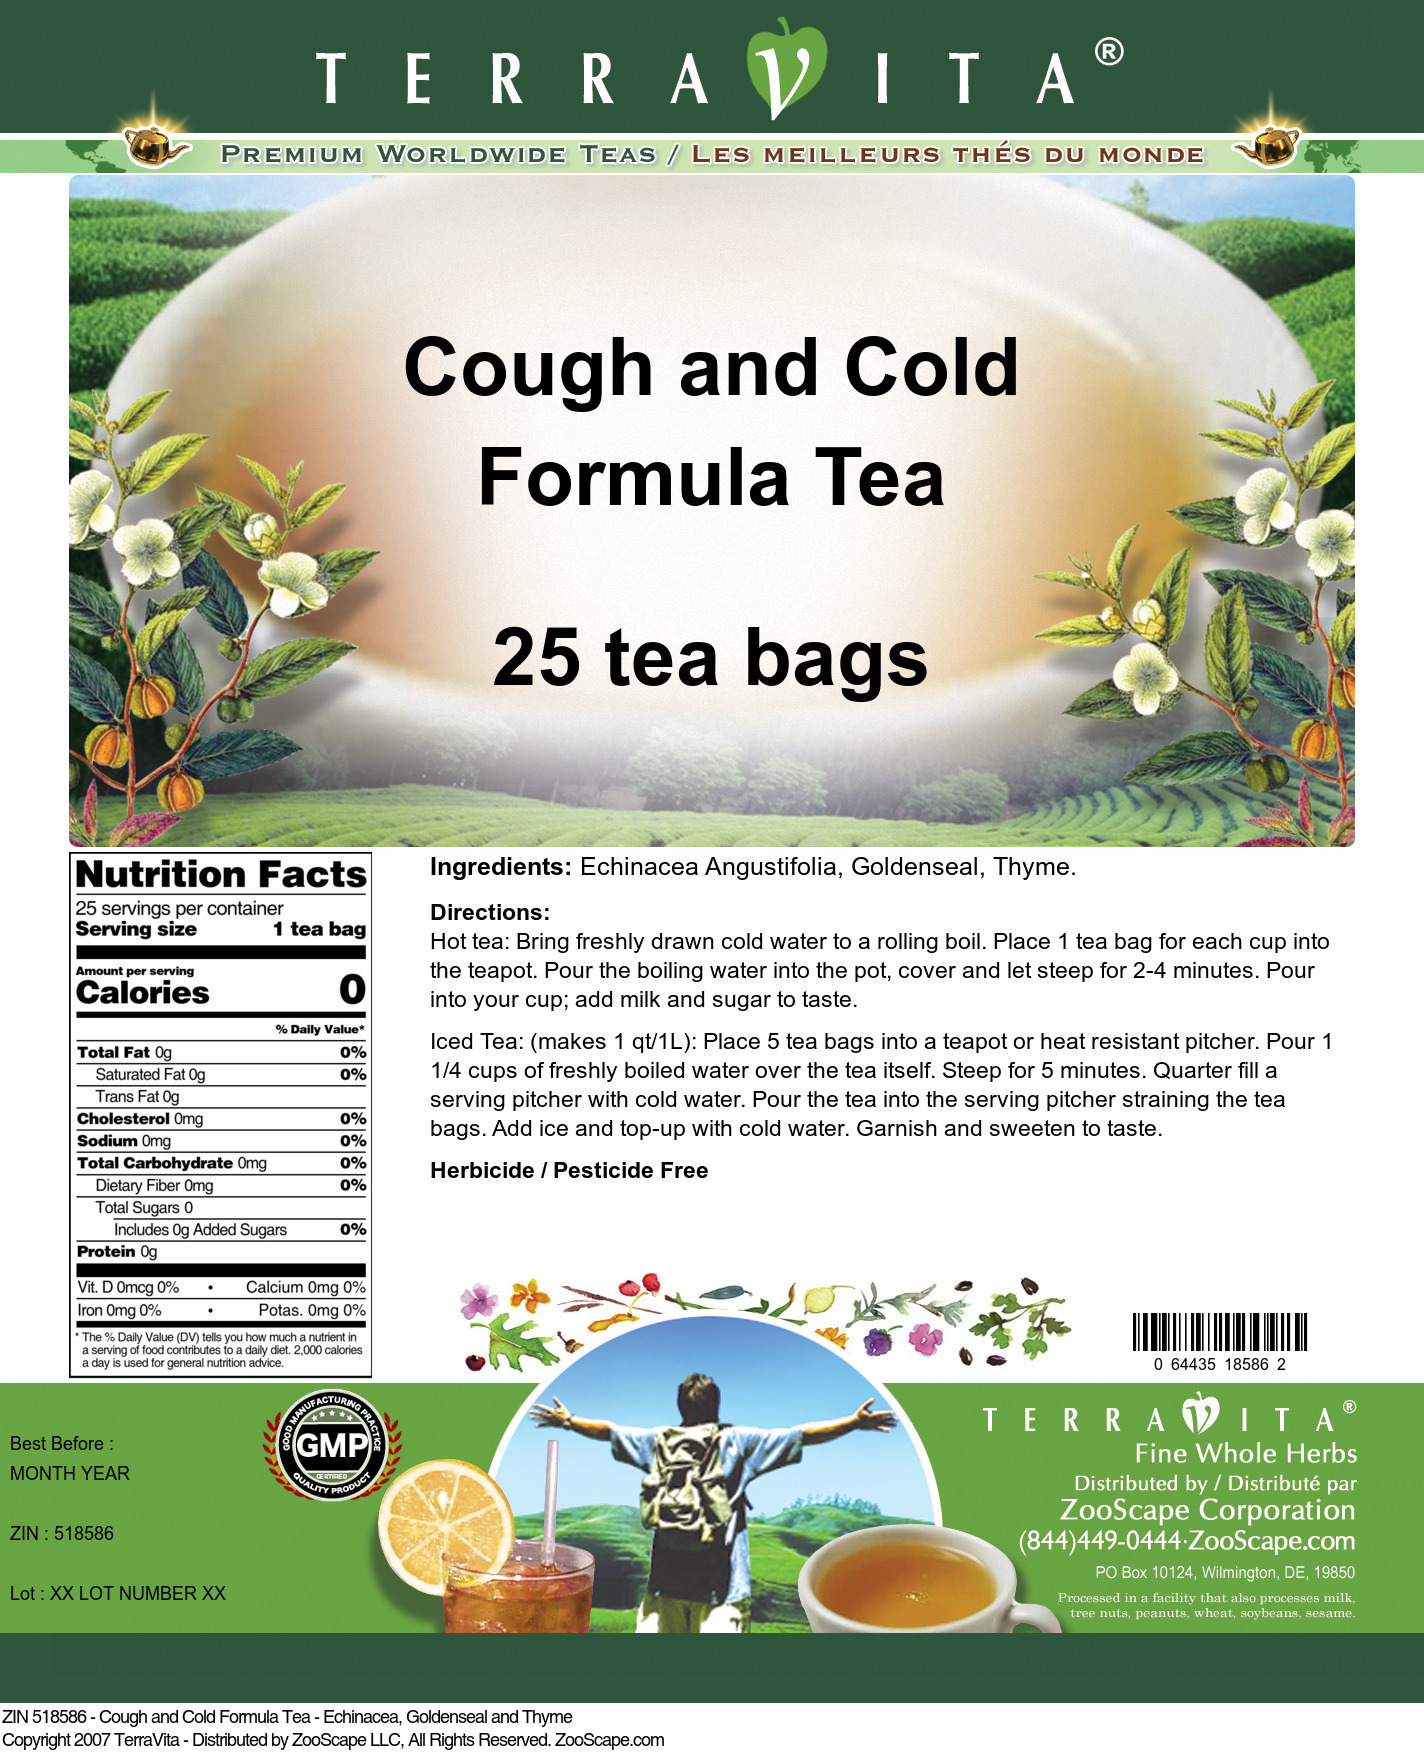 Cough and Cold Formula Tea - Echinacea, Goldenseal and Thyme - Label